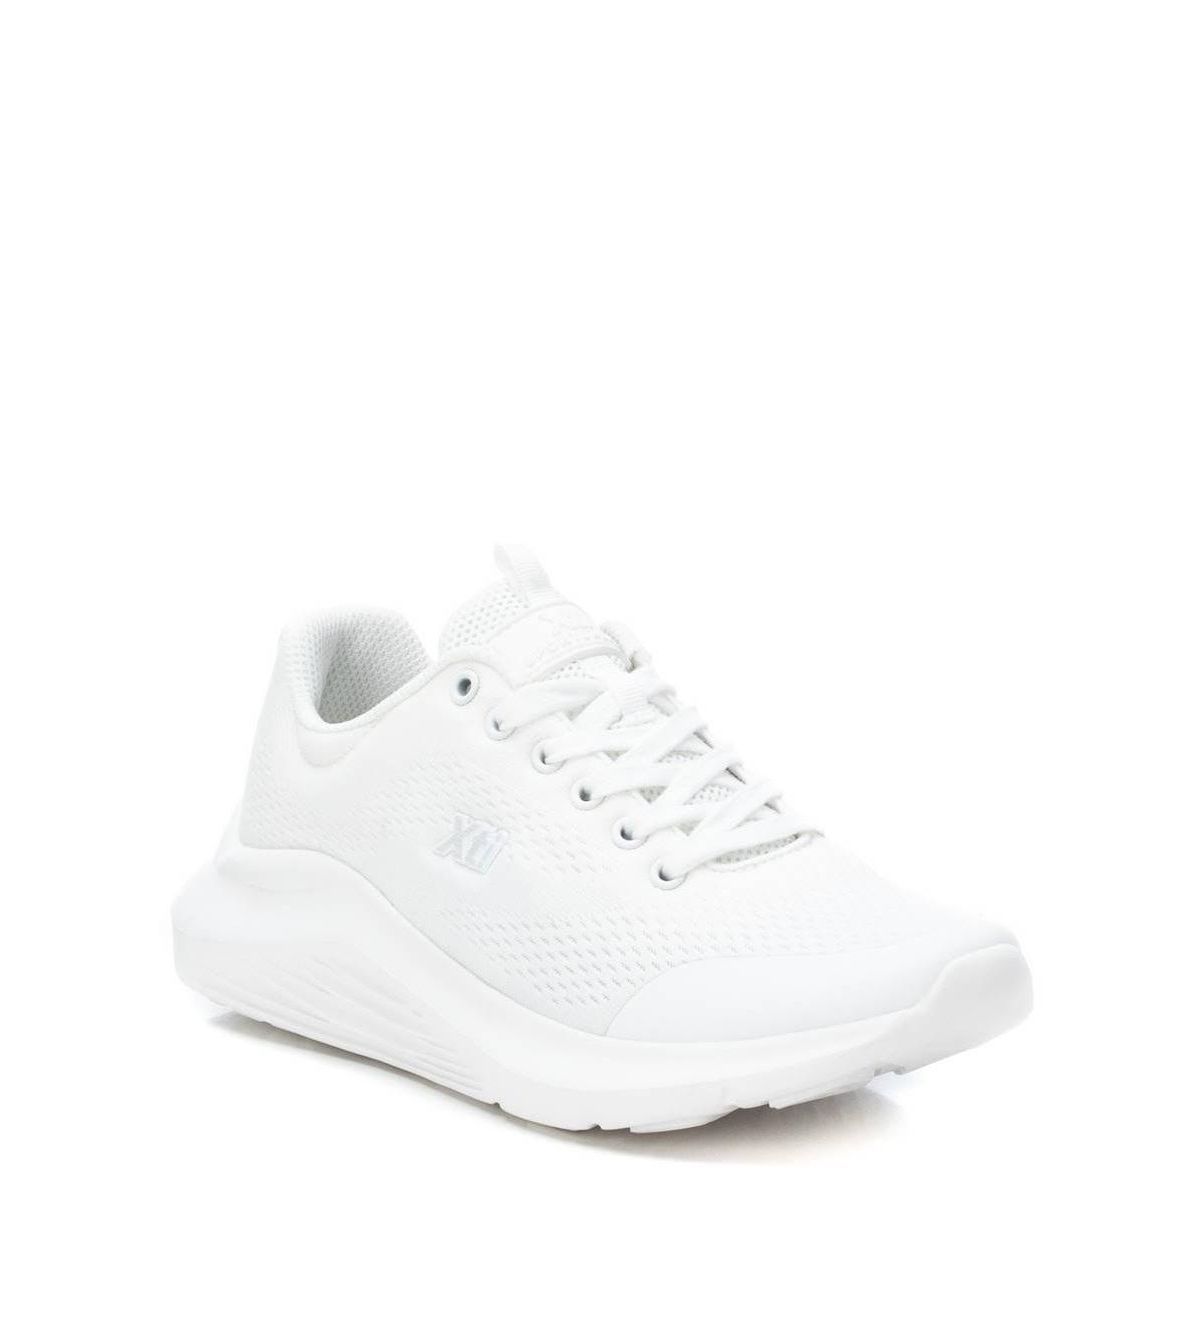 Women's Lace-Up Sneakers By Xti - White